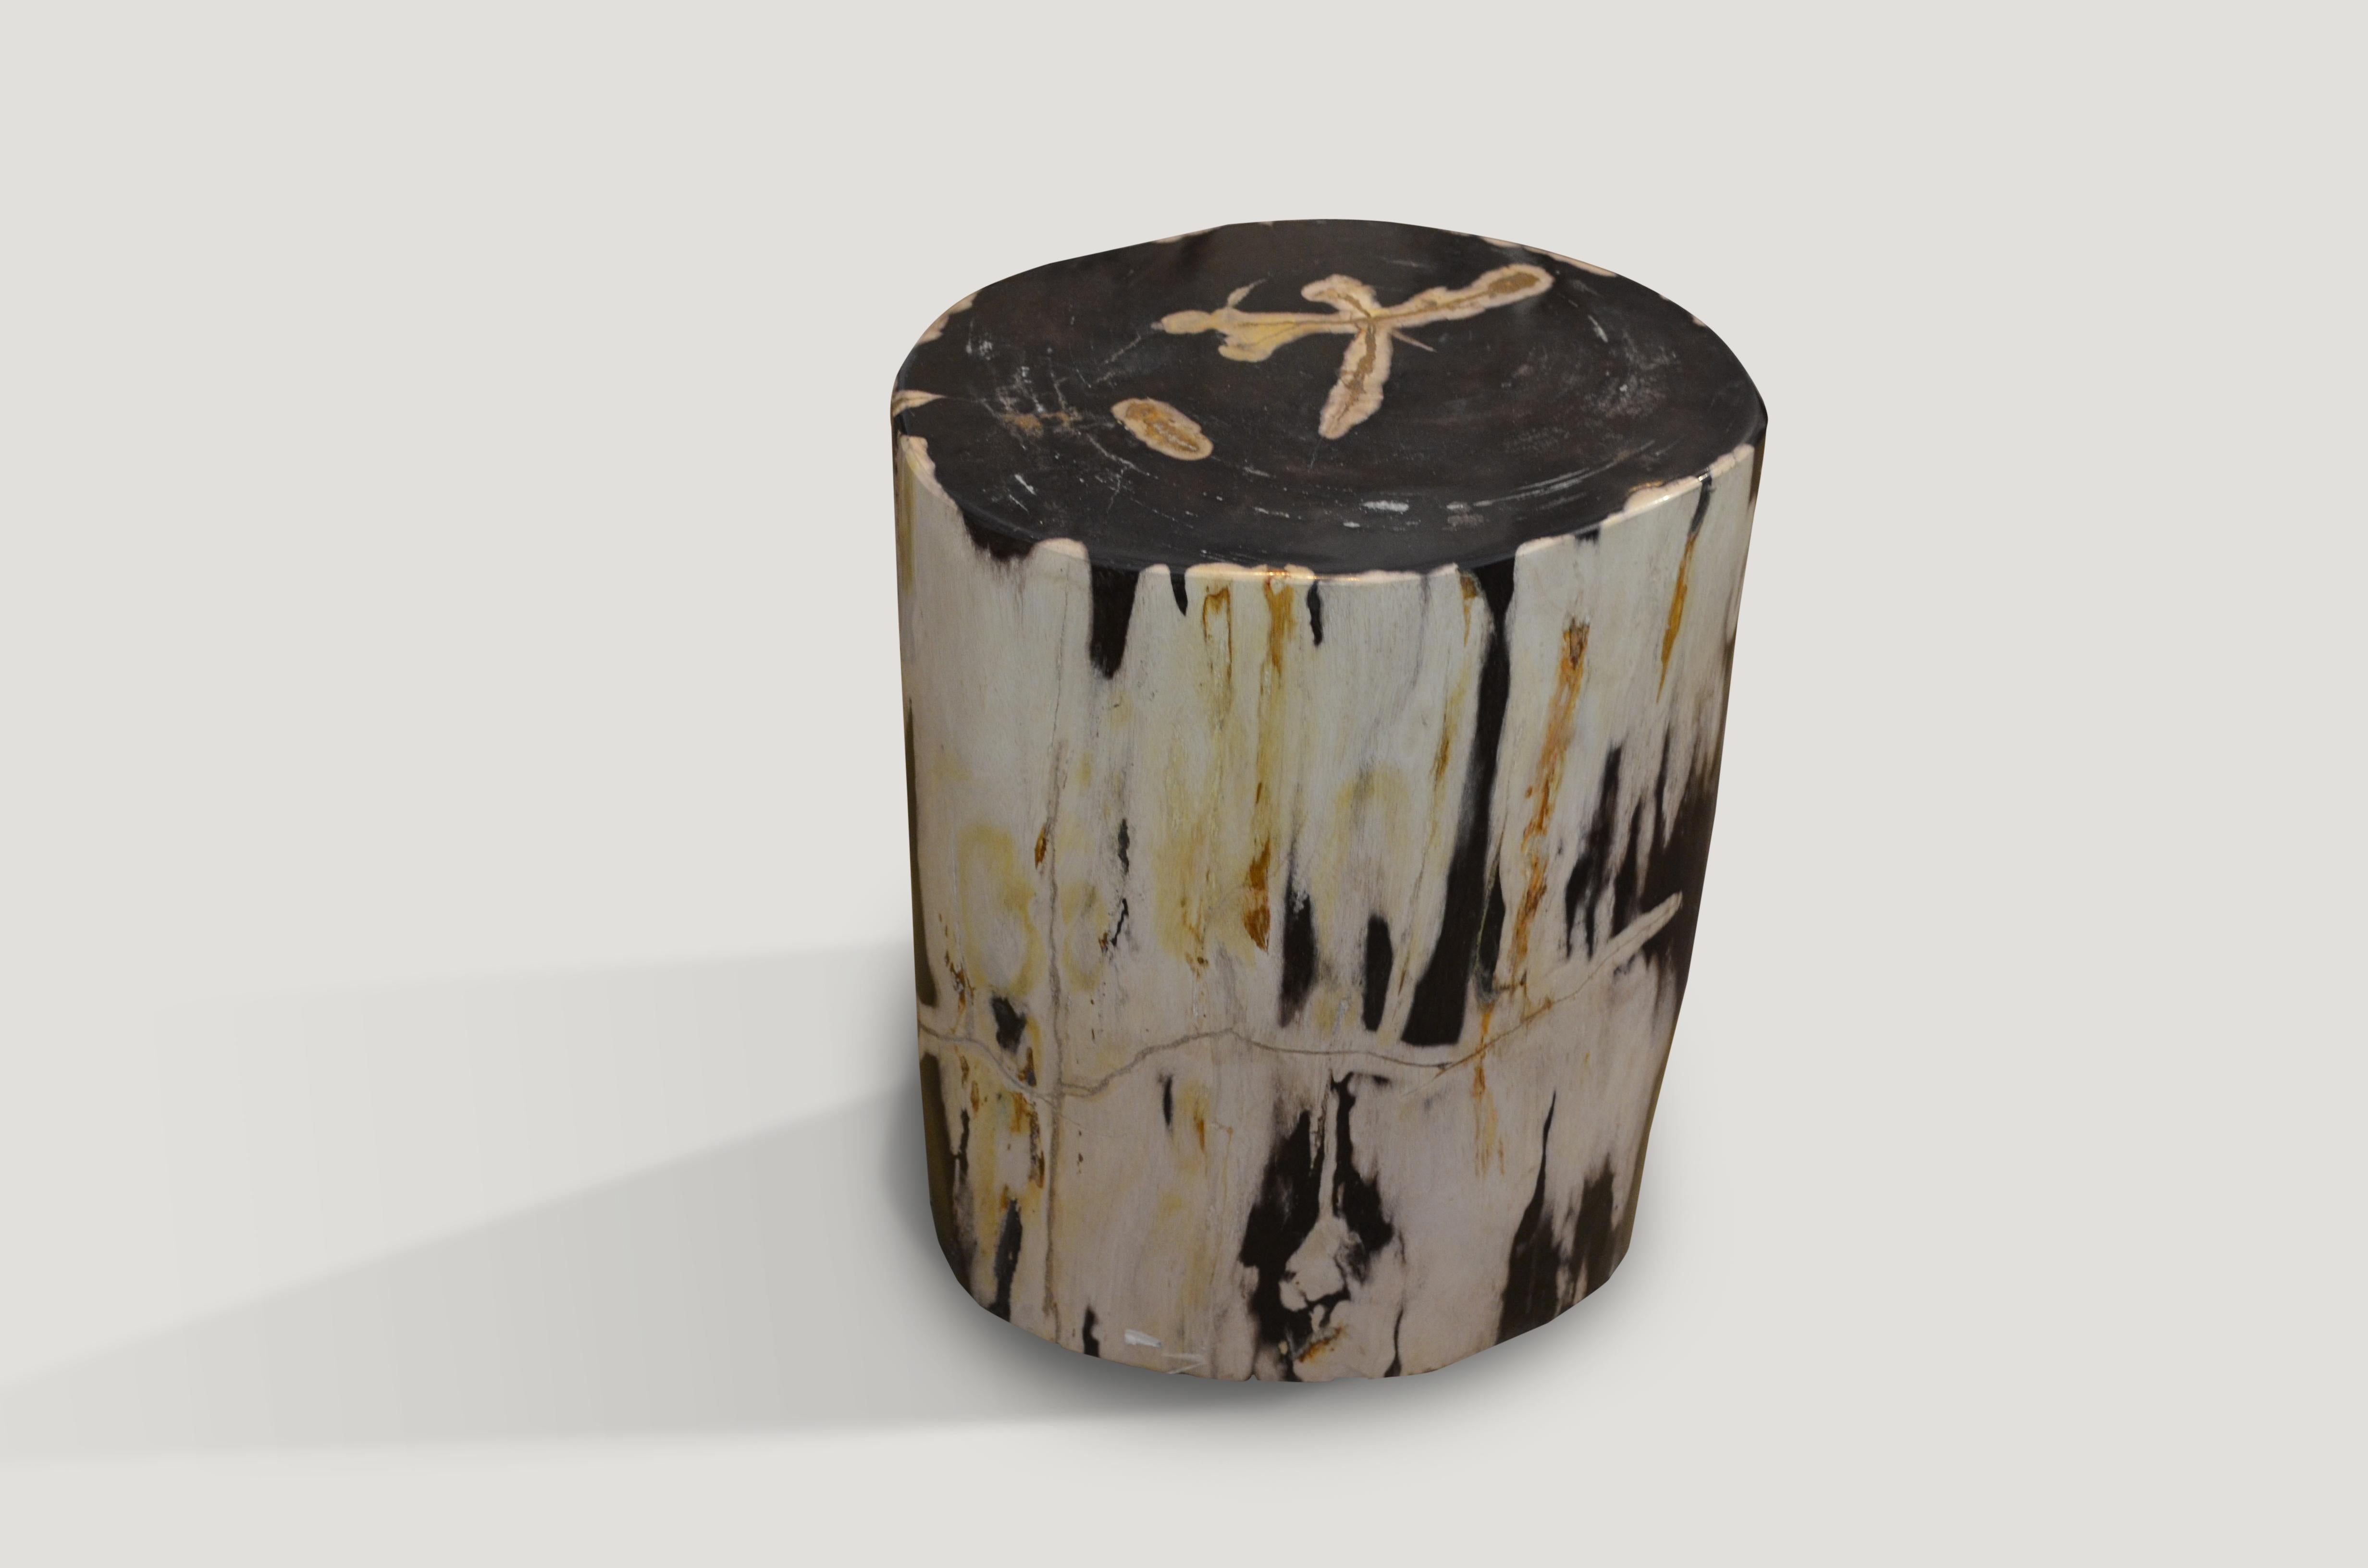 Stunning black and white petrified wood side table. We have a pair available cut from the same log. The price reflects one.

We source the highest quality petrified wood available. Each piece is hand selected and highly polished with minimal